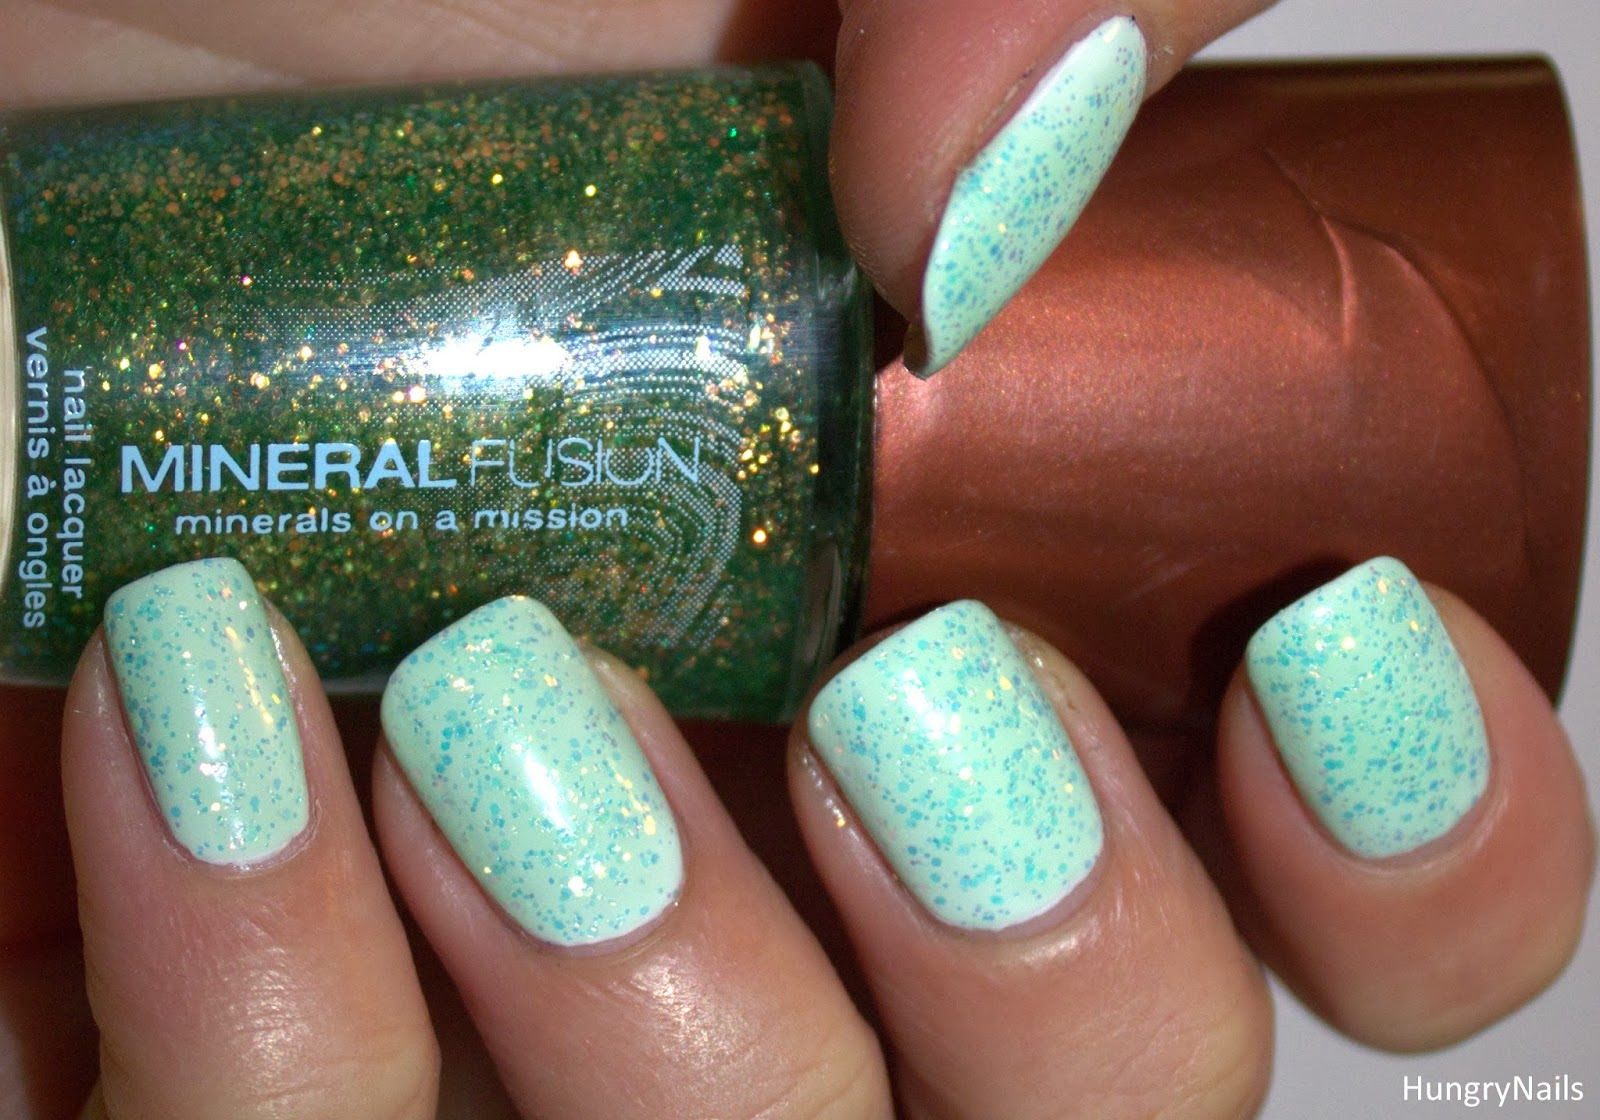 http://hungrynails.blogspot.de/2014/01/topper-time-mit-mineral-fusion.html